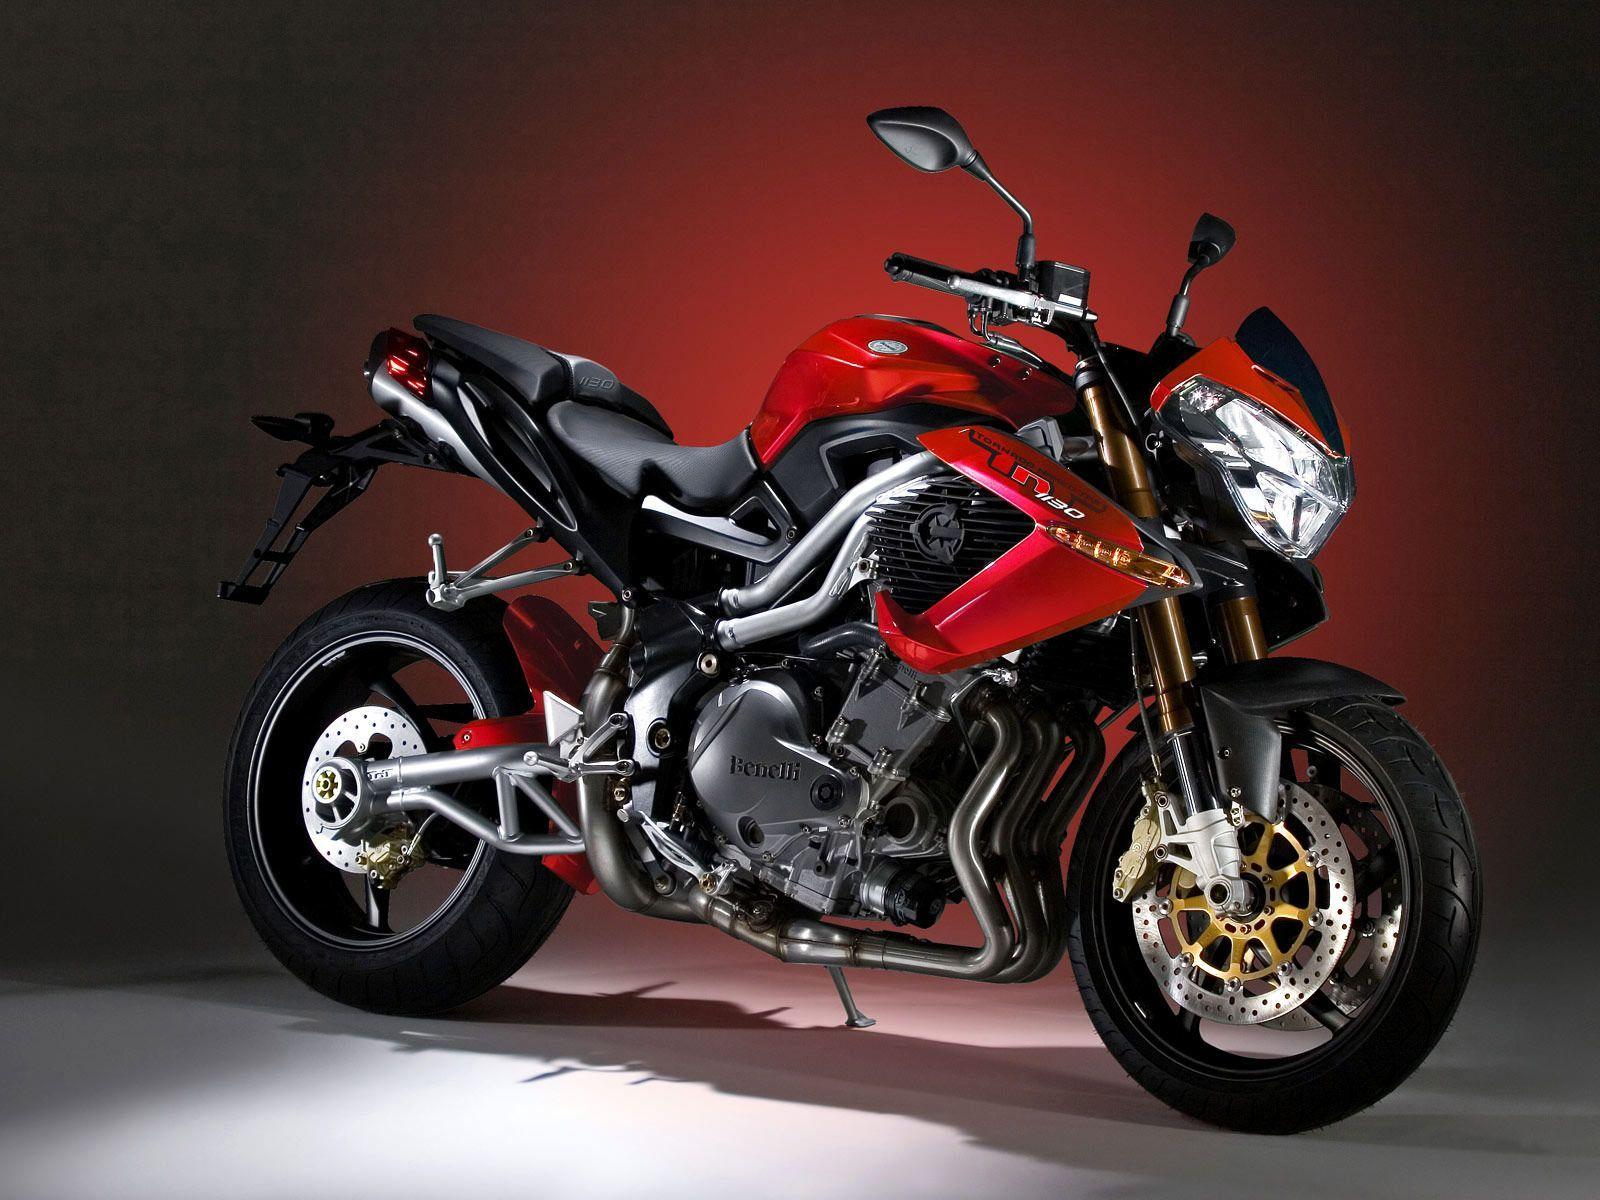 Benelli Motorbikes Wallpaper & Picture, Get Free top quality